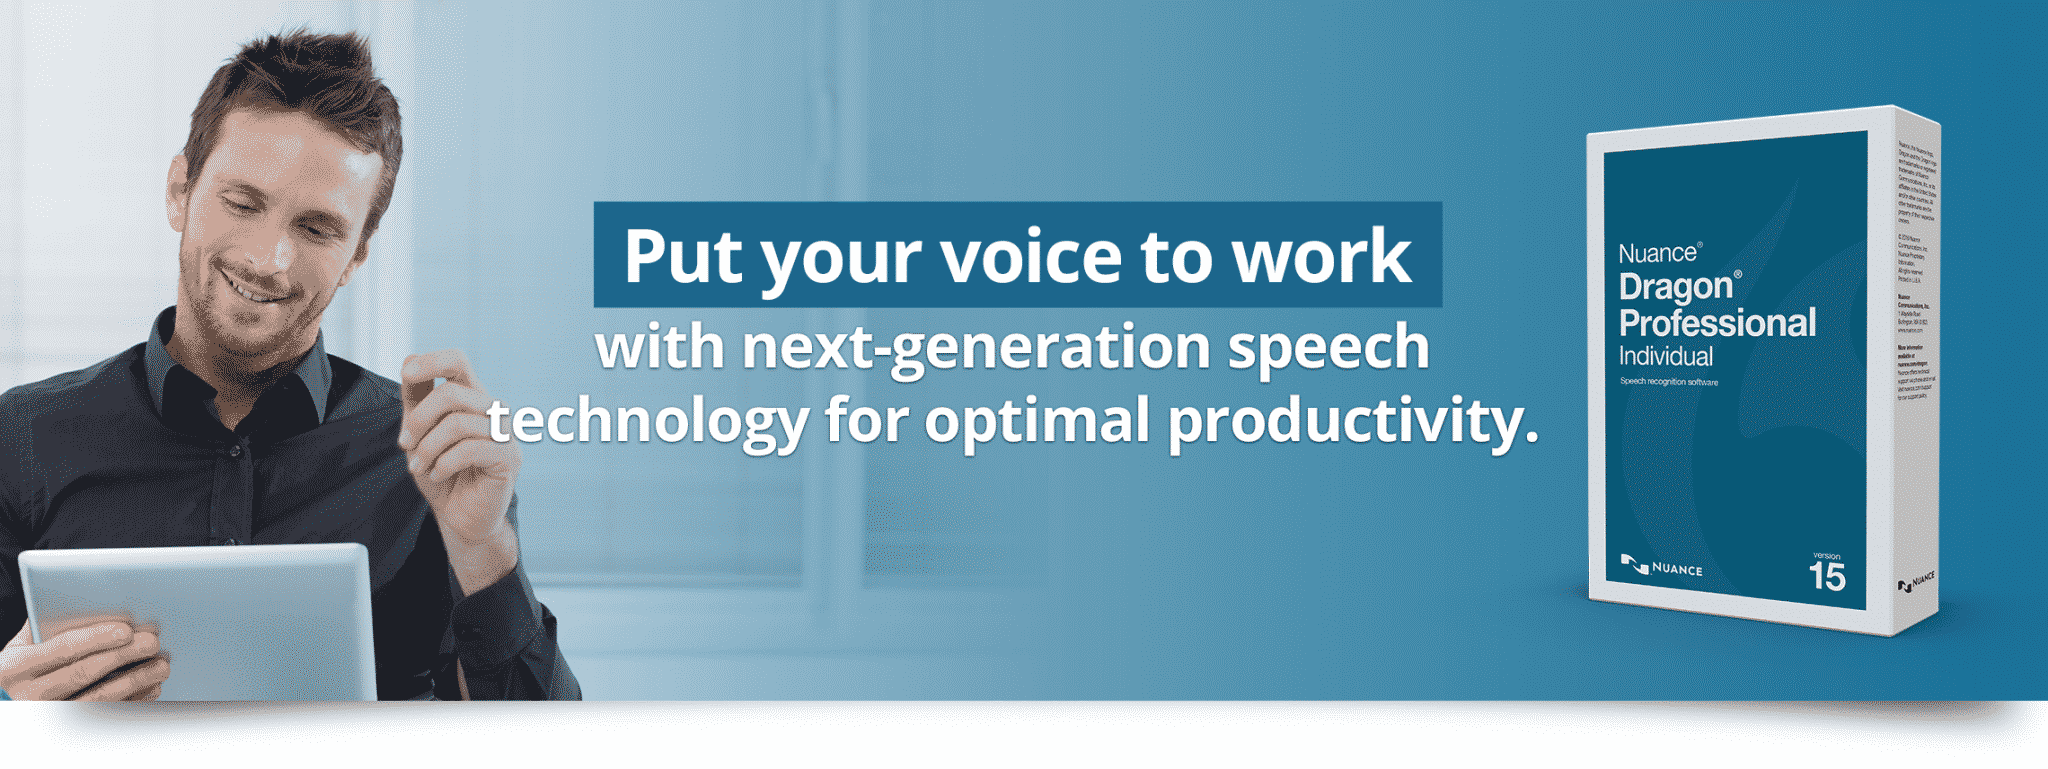 Put your voice to work with next-generation speech technology for optimal productivity.